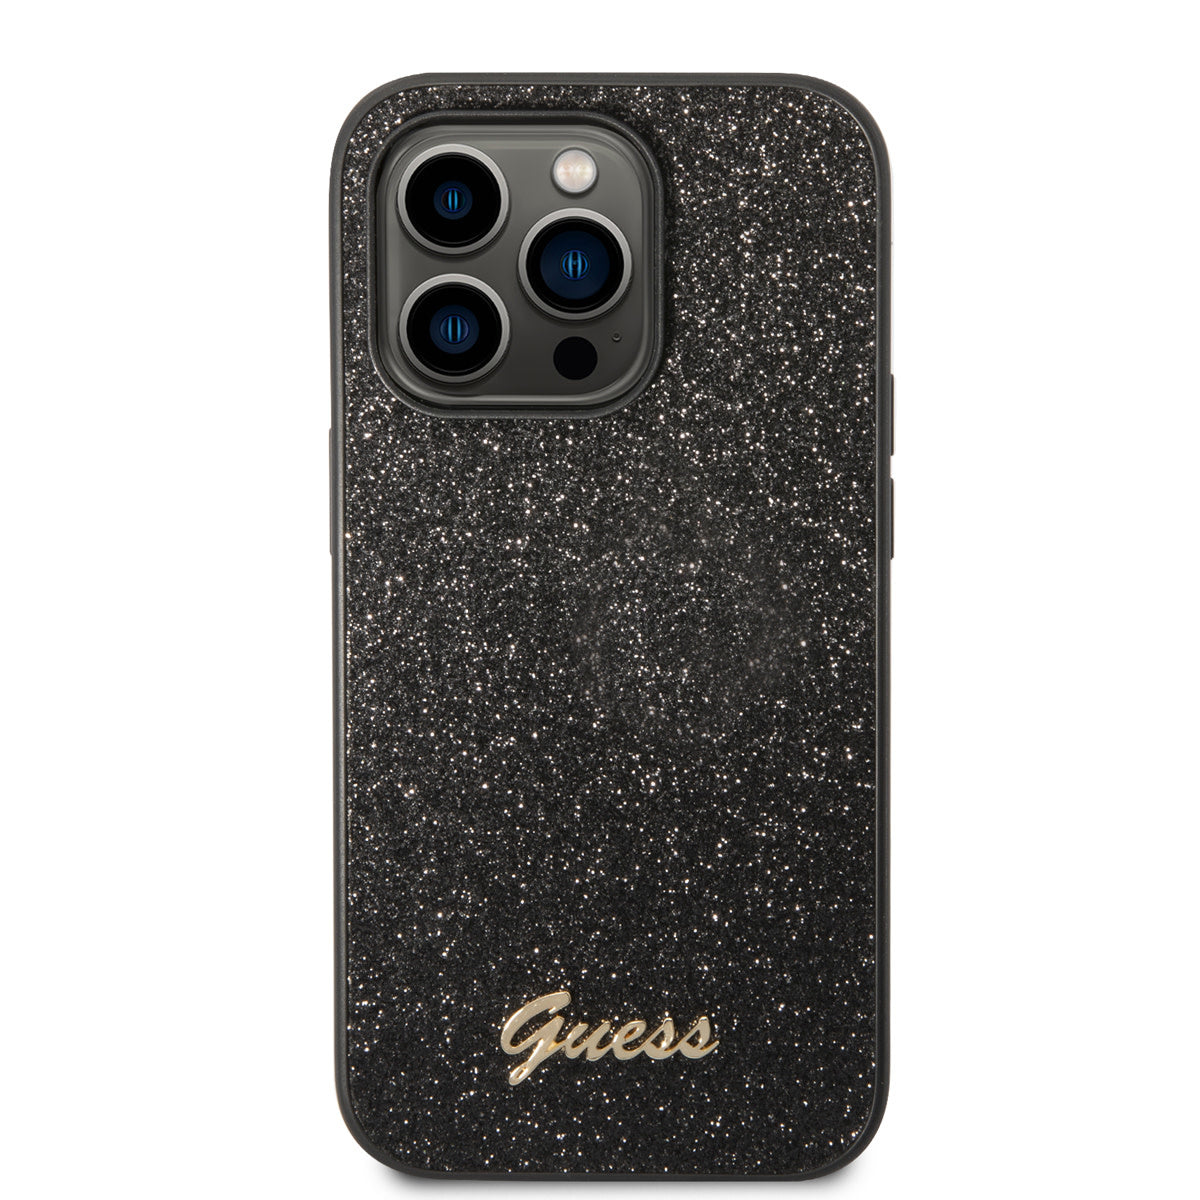 Guess iPhone 14 Pro Max Backcover - Glitter Collectie - Zwart